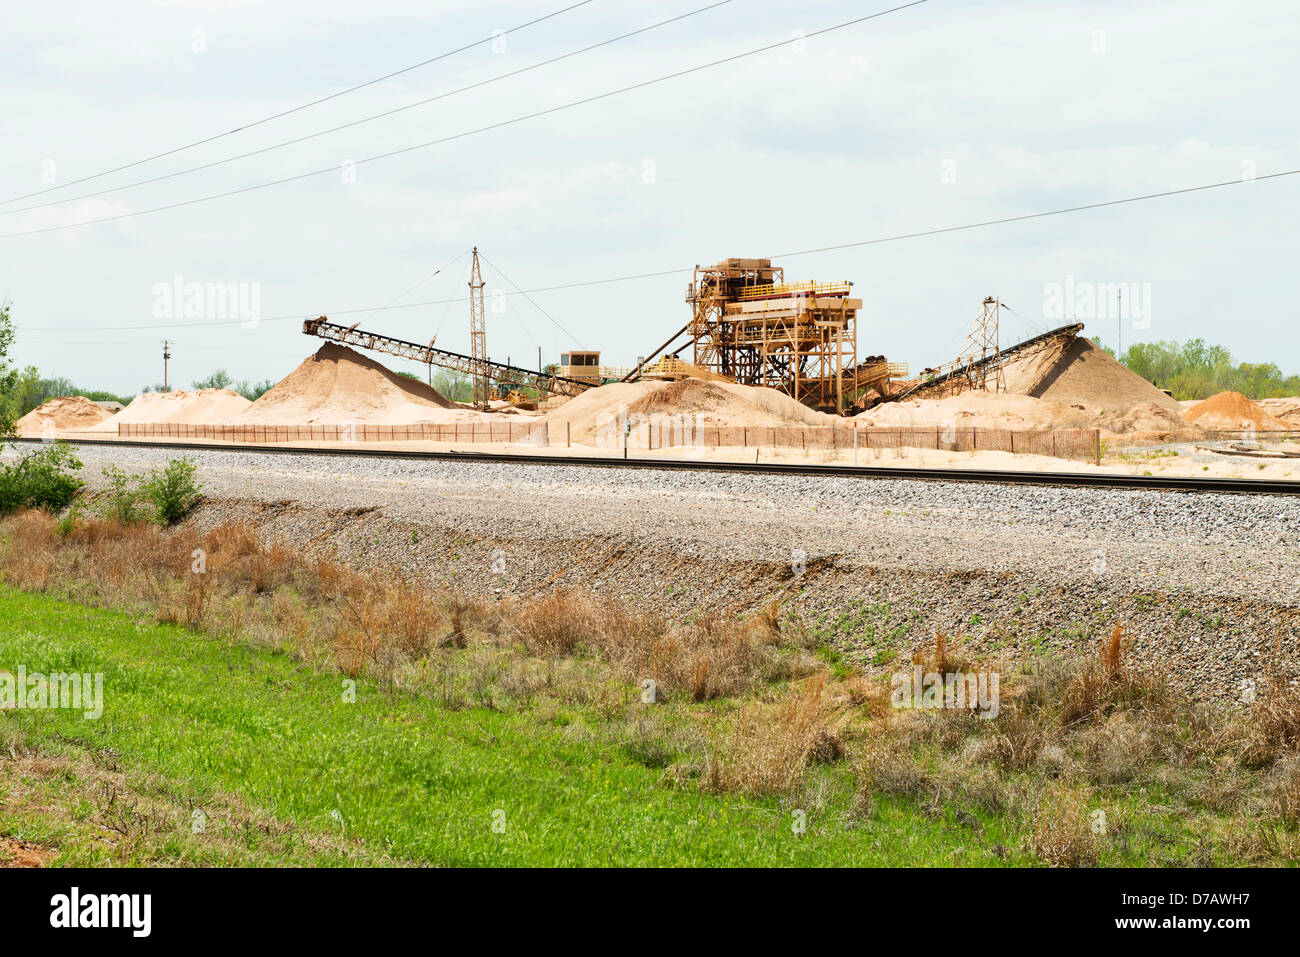 A sand processing plant in Oklahoma, USA. Stock Photo